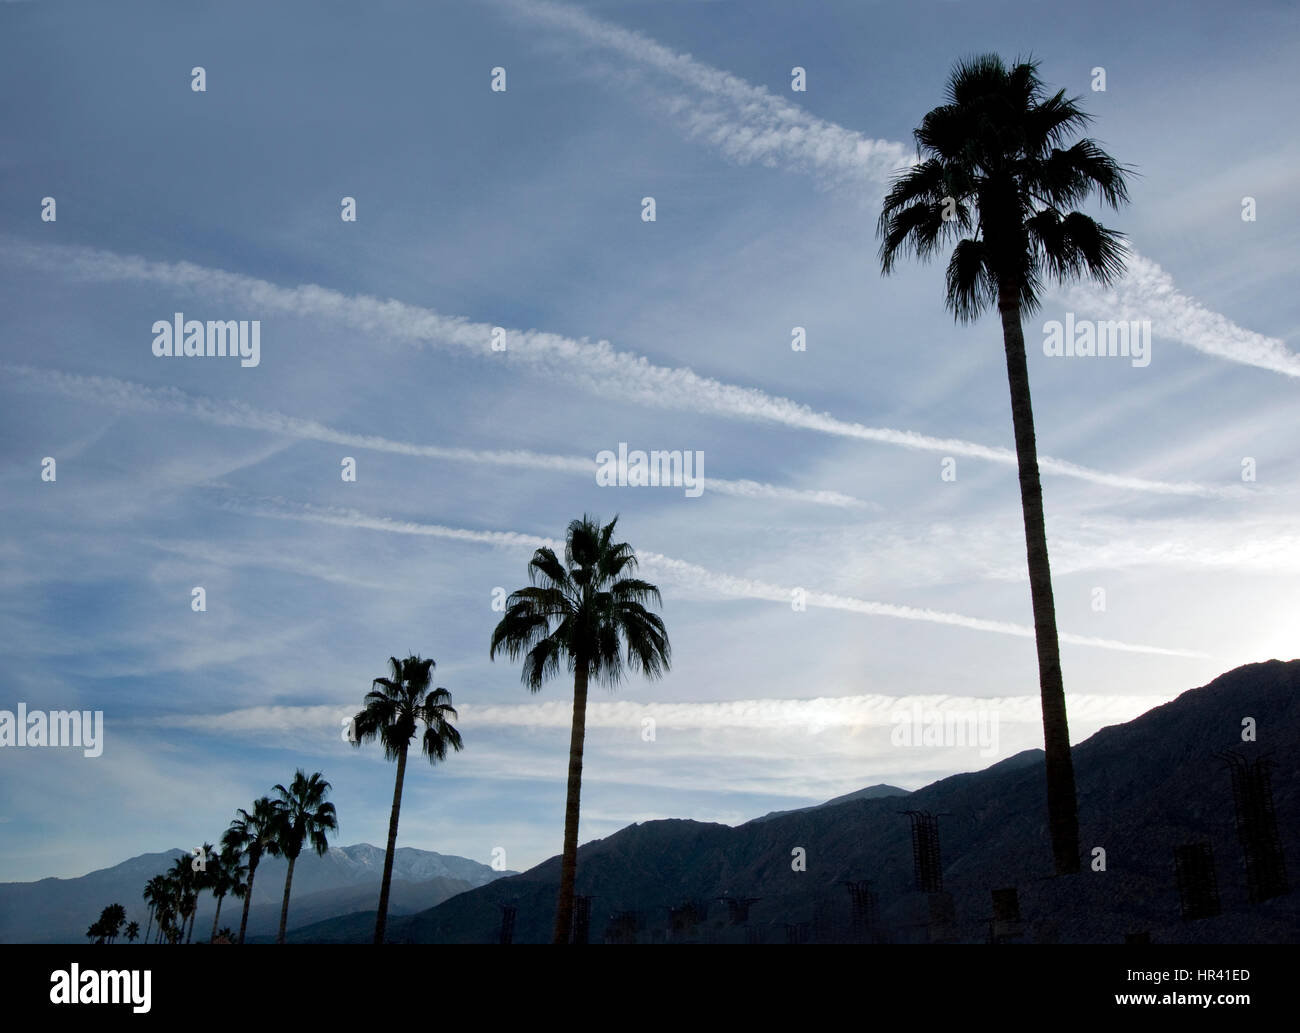 Palm trees and mountains at sunset in Palm Springs Stock Photo